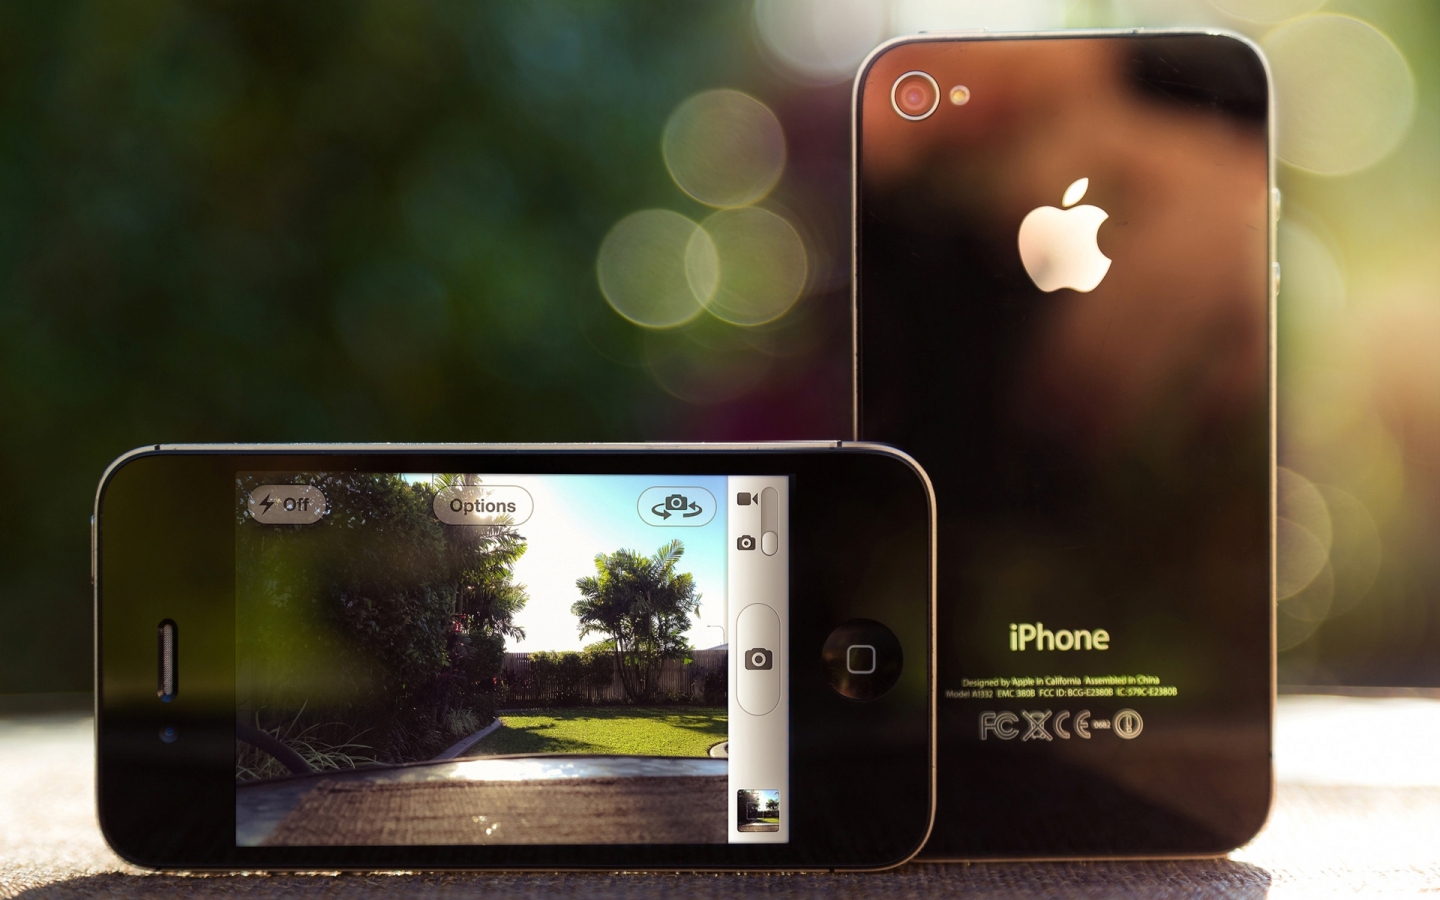 iPhone 4 for 1440 x 900 widescreen resolution